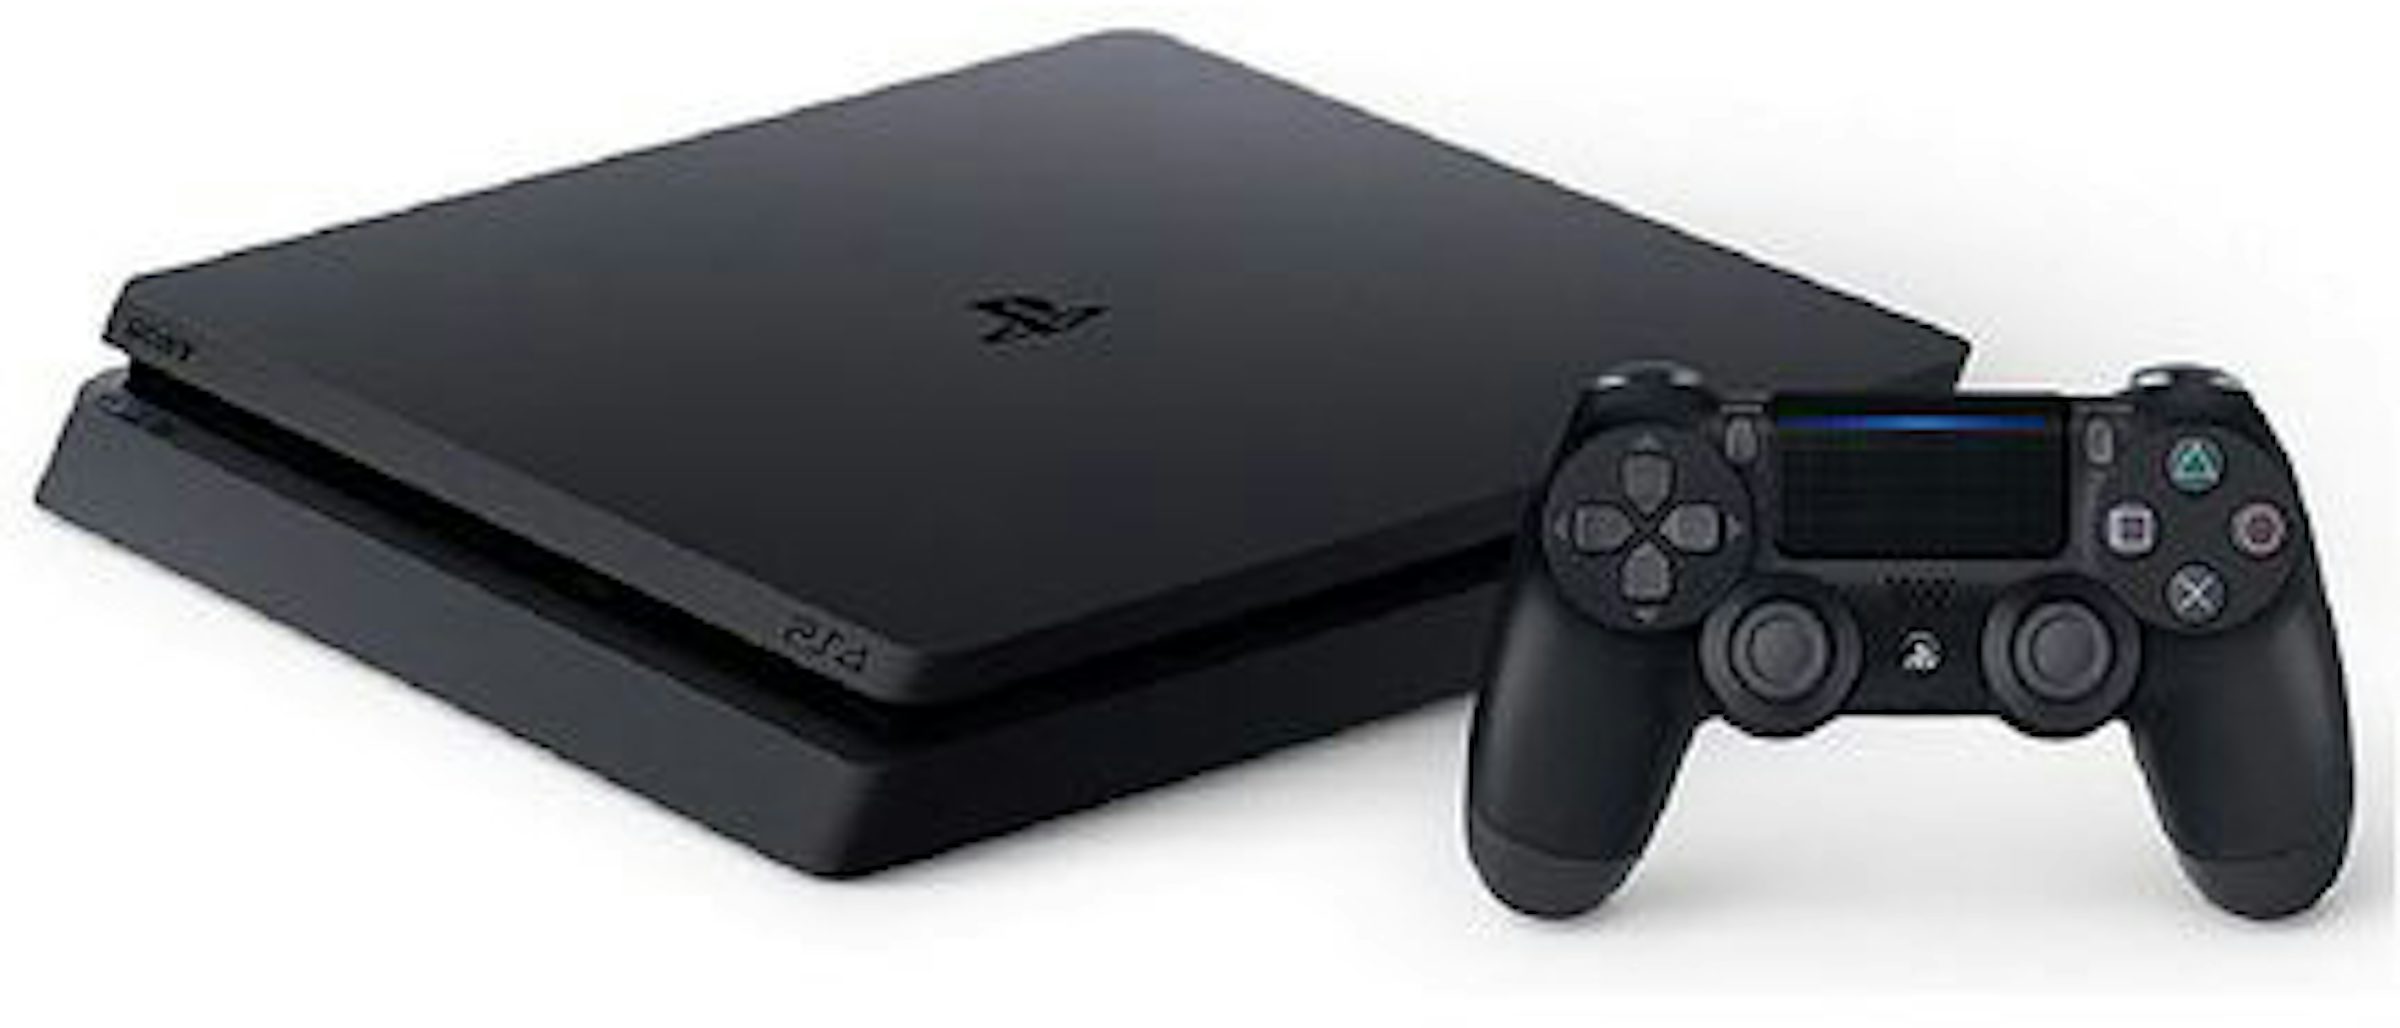  PlayStation 4 Slim 1TB Console : Video Games